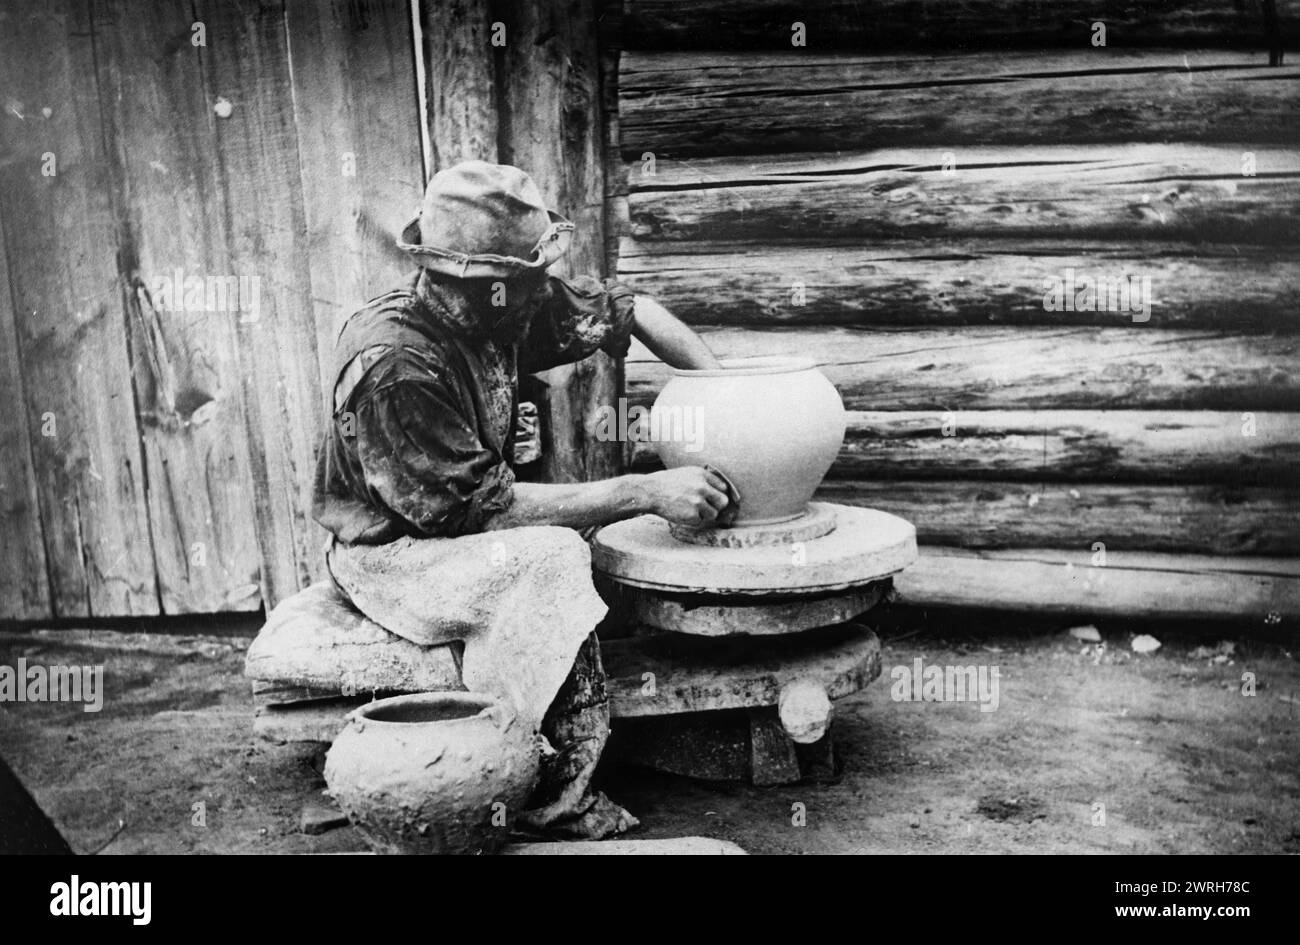 Handicraft potter from the village of Atamanovskoye, Krasnoyarsk district, 1900. This collection includes more than four hundred photographs of daily life in Yenisei Province in the late tsarist period. Photographs include peasants, Cossacks, and high-ranking officials. Krasnoiarsk Krai Museum of Regional History and Folklife Stock Photo